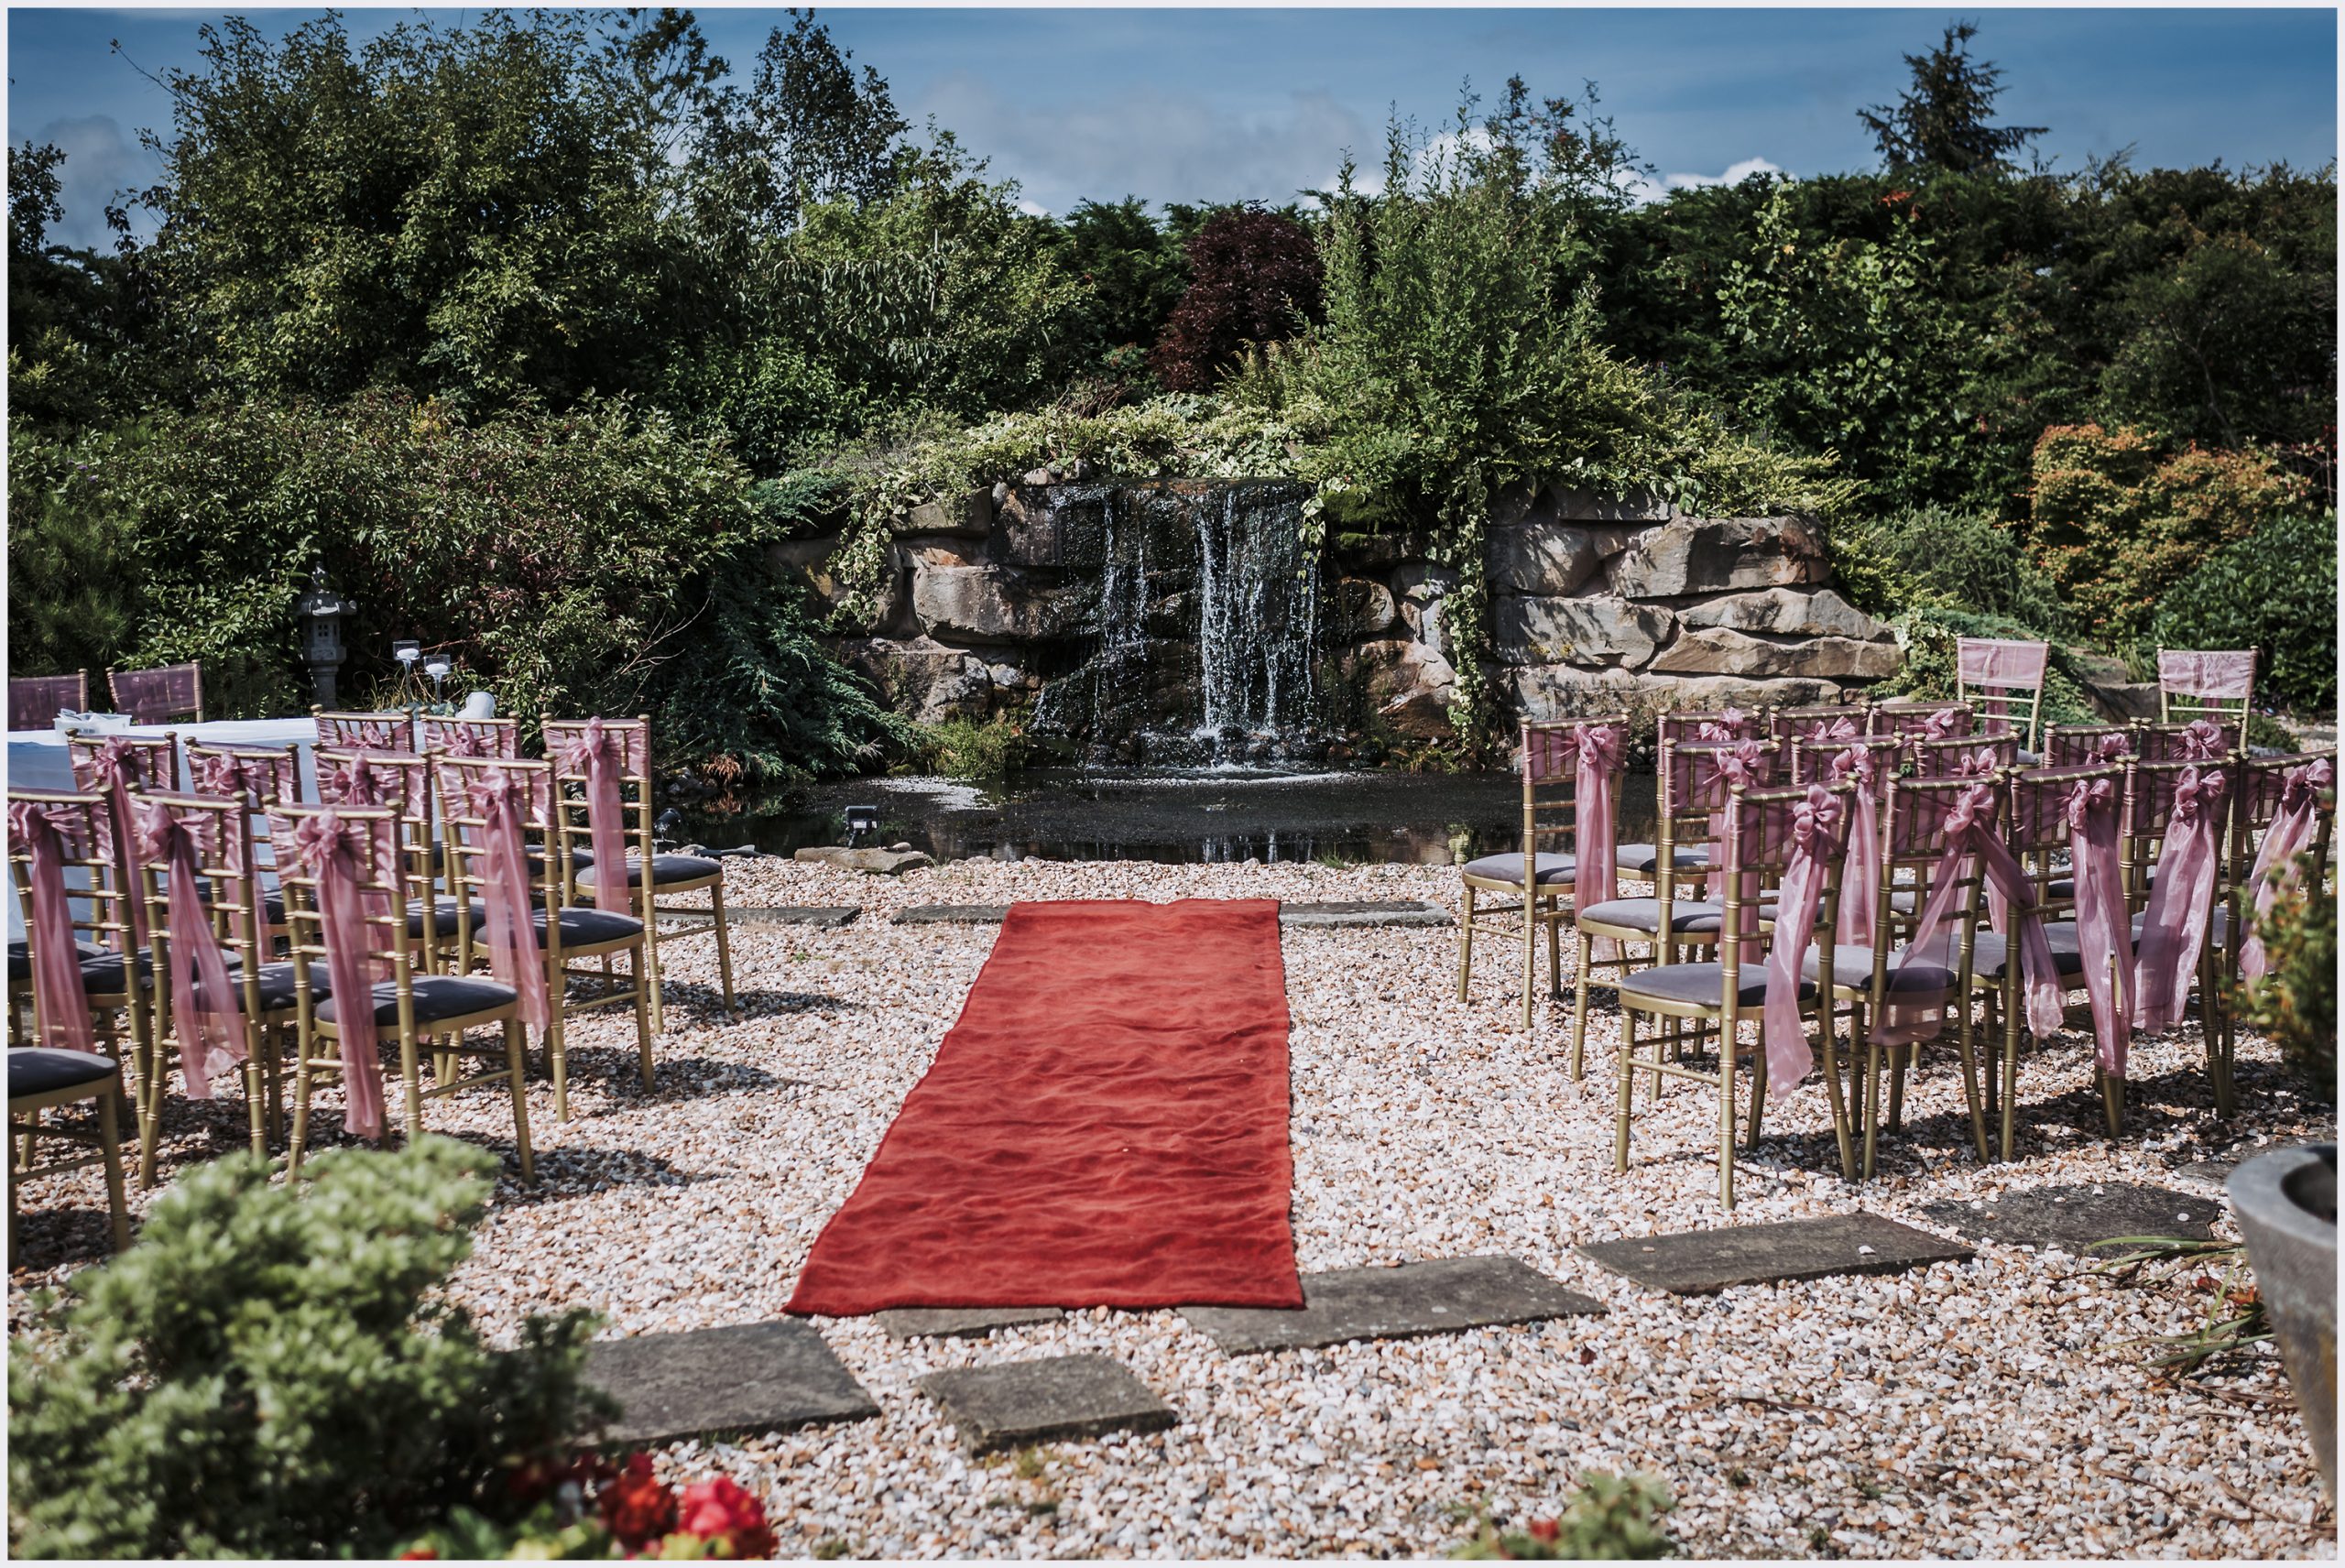 An out door ceremony scene taken at The Grosvenor Pulford Hotel and Spa.  Pale pink sashes are tied in bows on the back of the chairs and a waterfall is in the background.  Image captured by Helena Jayne Photography at the Grosvenor Pulford Hotel and Spa